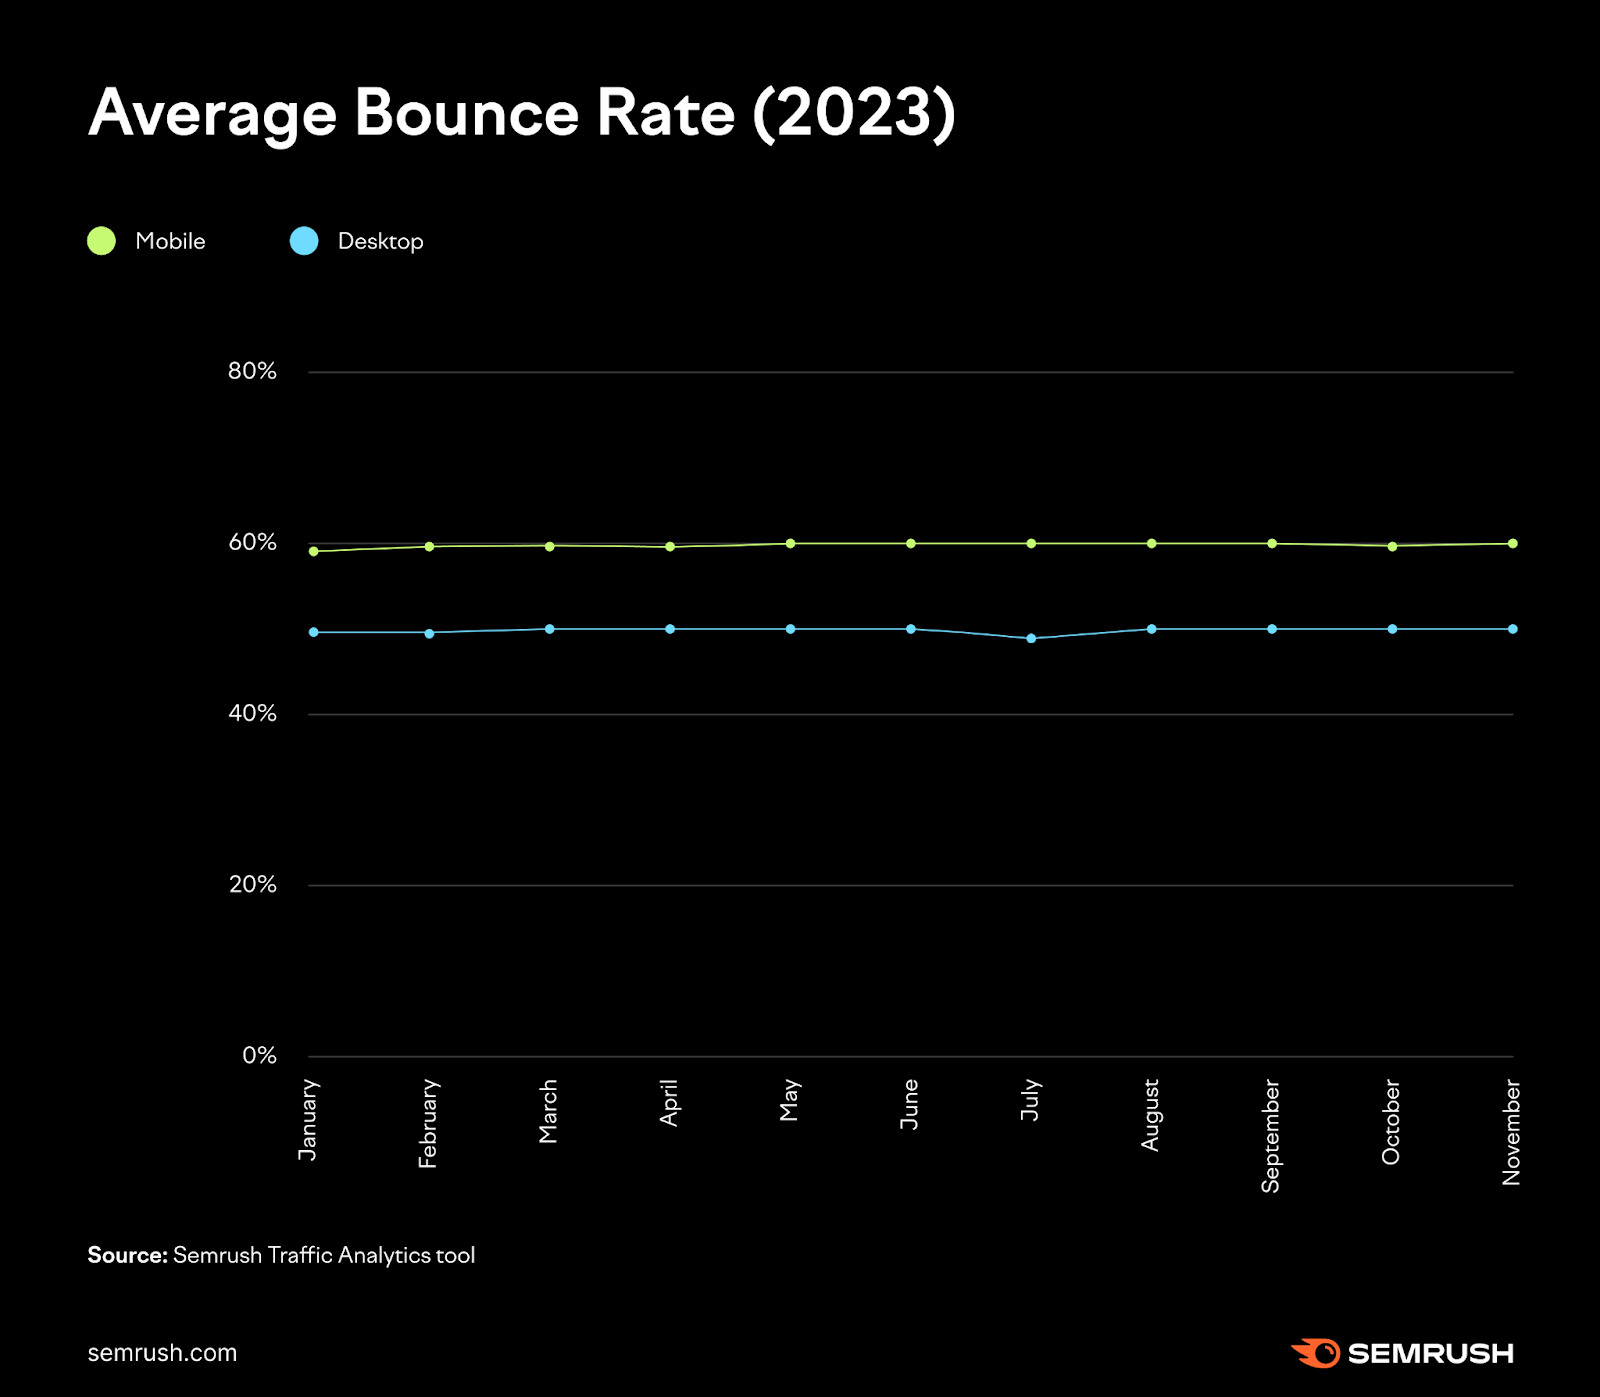 A graph showing average bounce rate in 2023, for desktop and mobile, using data from Traffic Analytics tool